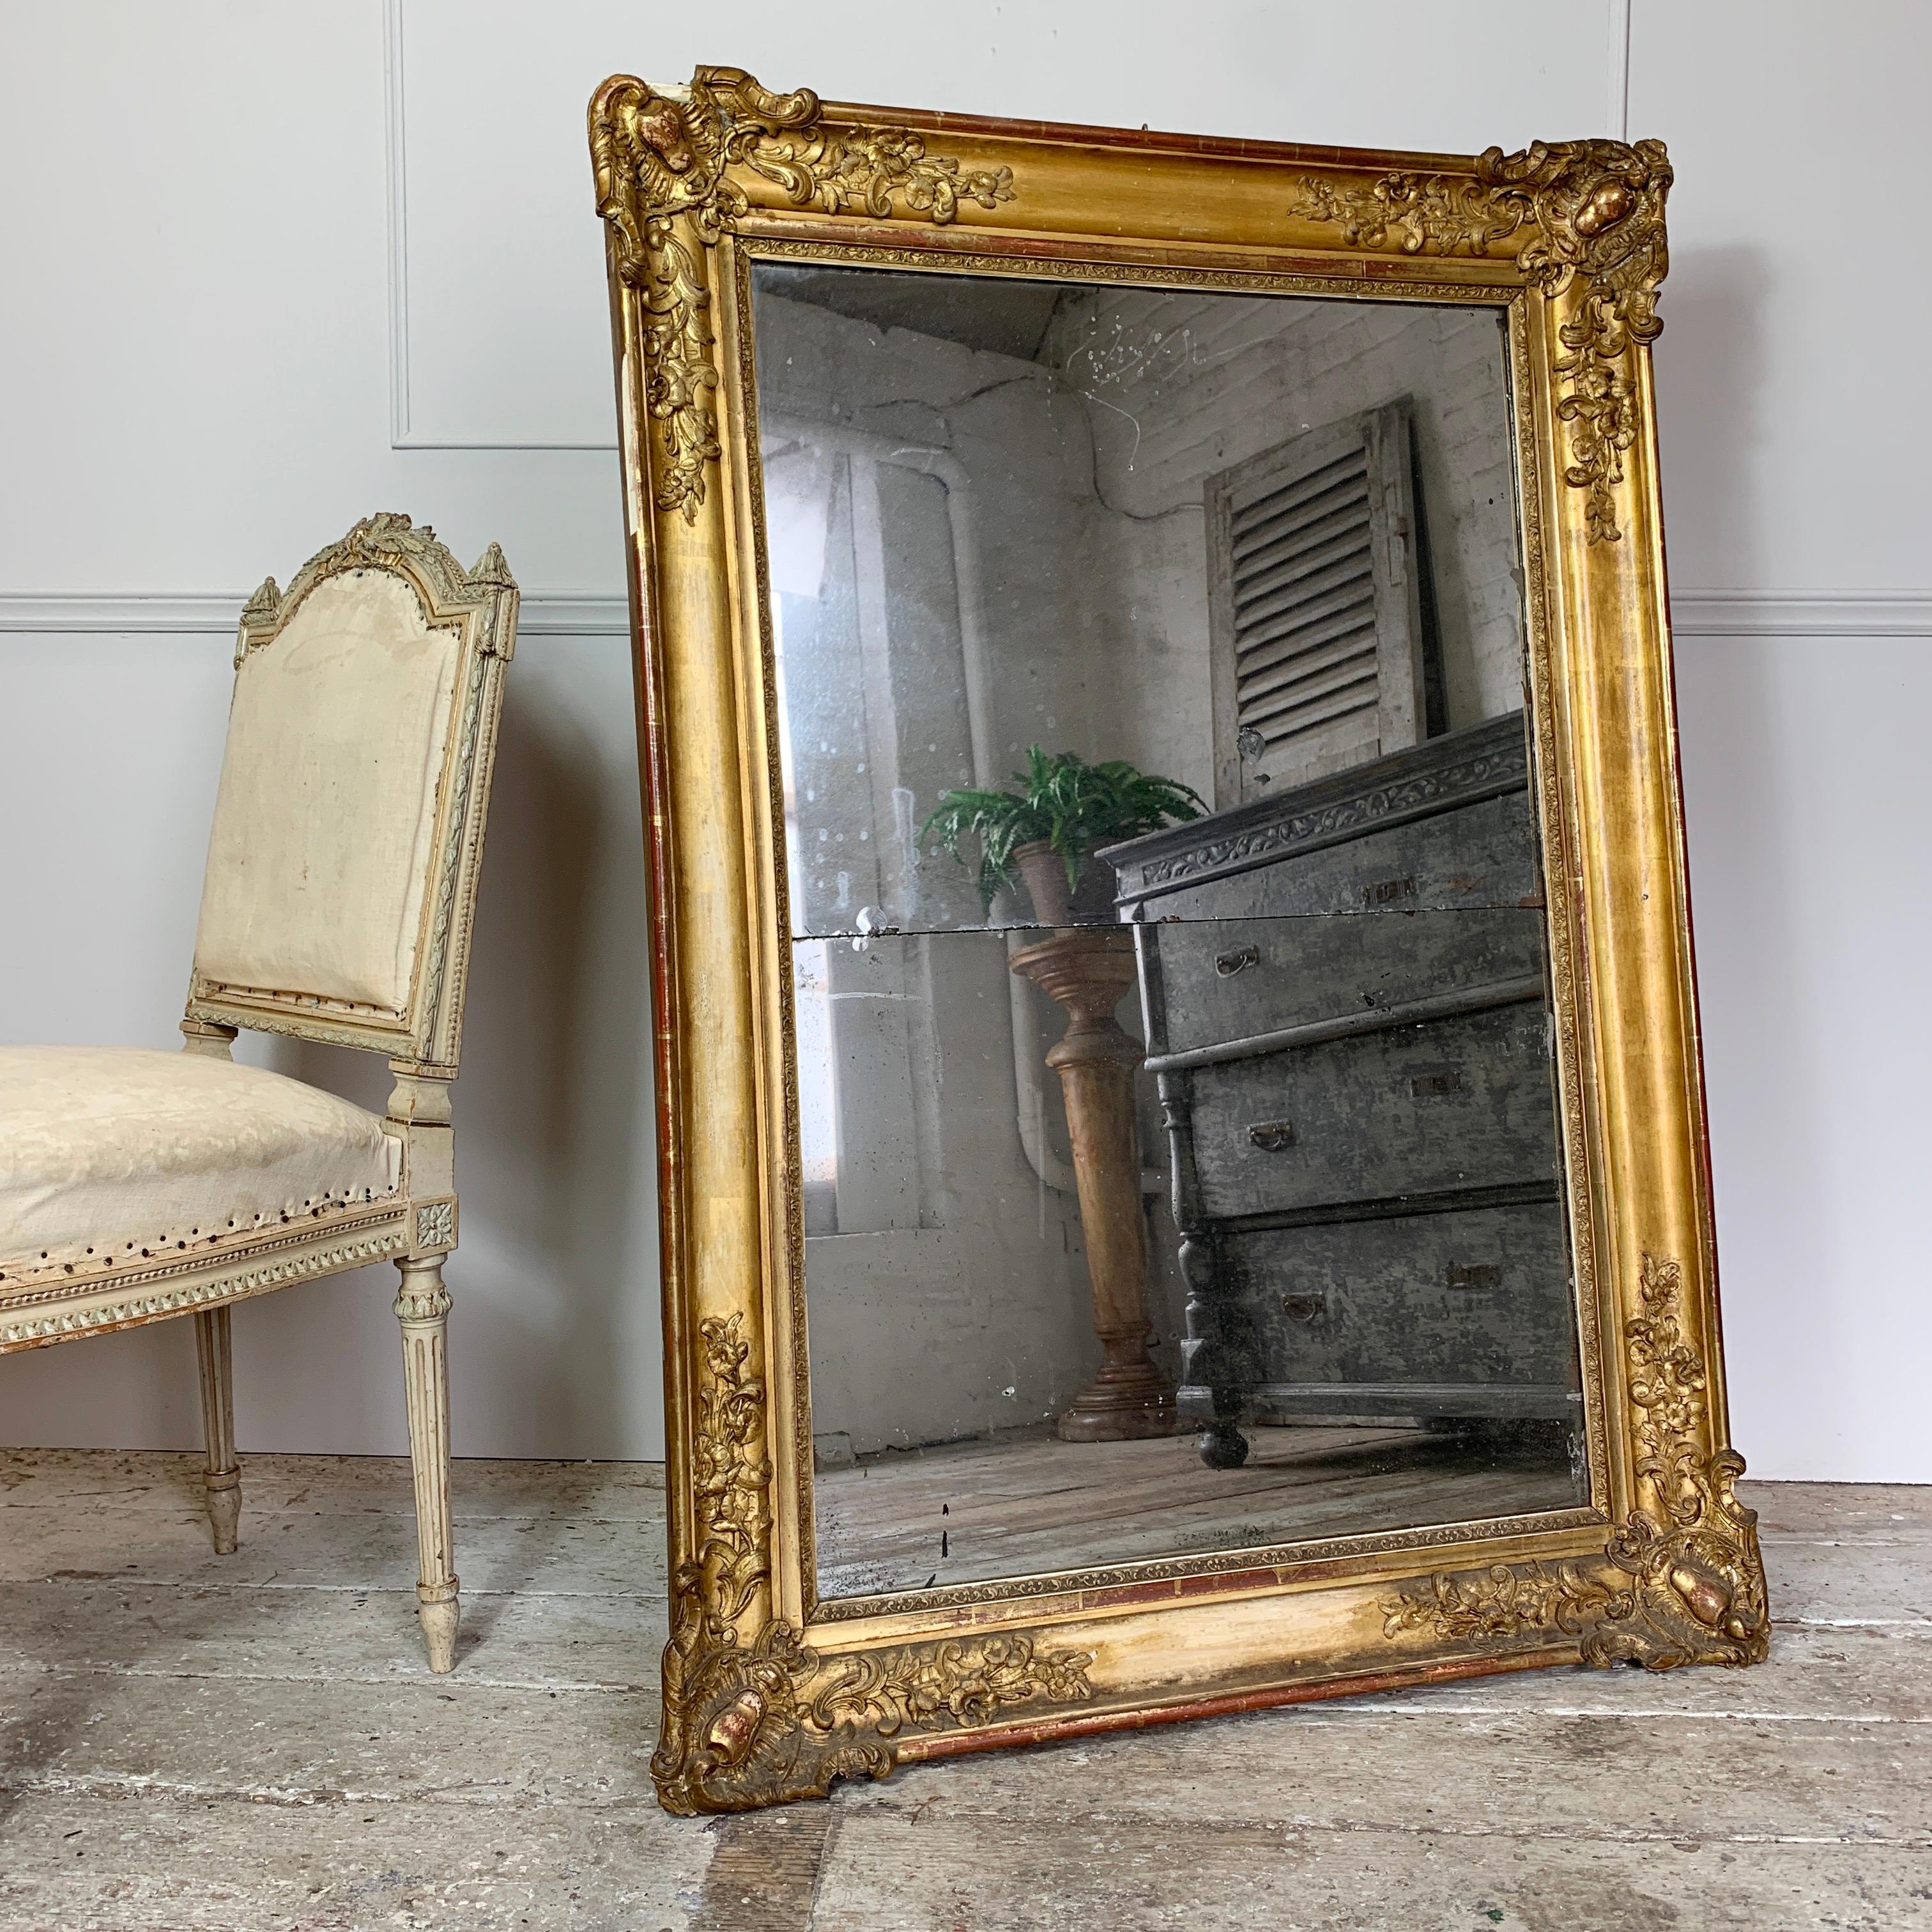 Beautiful Gilt Swept Split plate French mirror. Late 18th Century, Silver Backed Mirror Plates

Fabulous Twin Plate Mirror With Foxing And Historical Wear Throughout

The Frame Has Some Areas Of Gesso Loss As Shown
The Back Of The Mirror Has